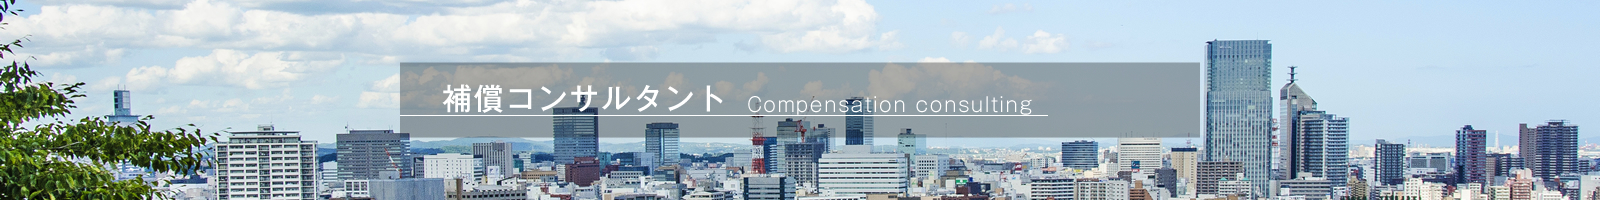 compensation-consulting